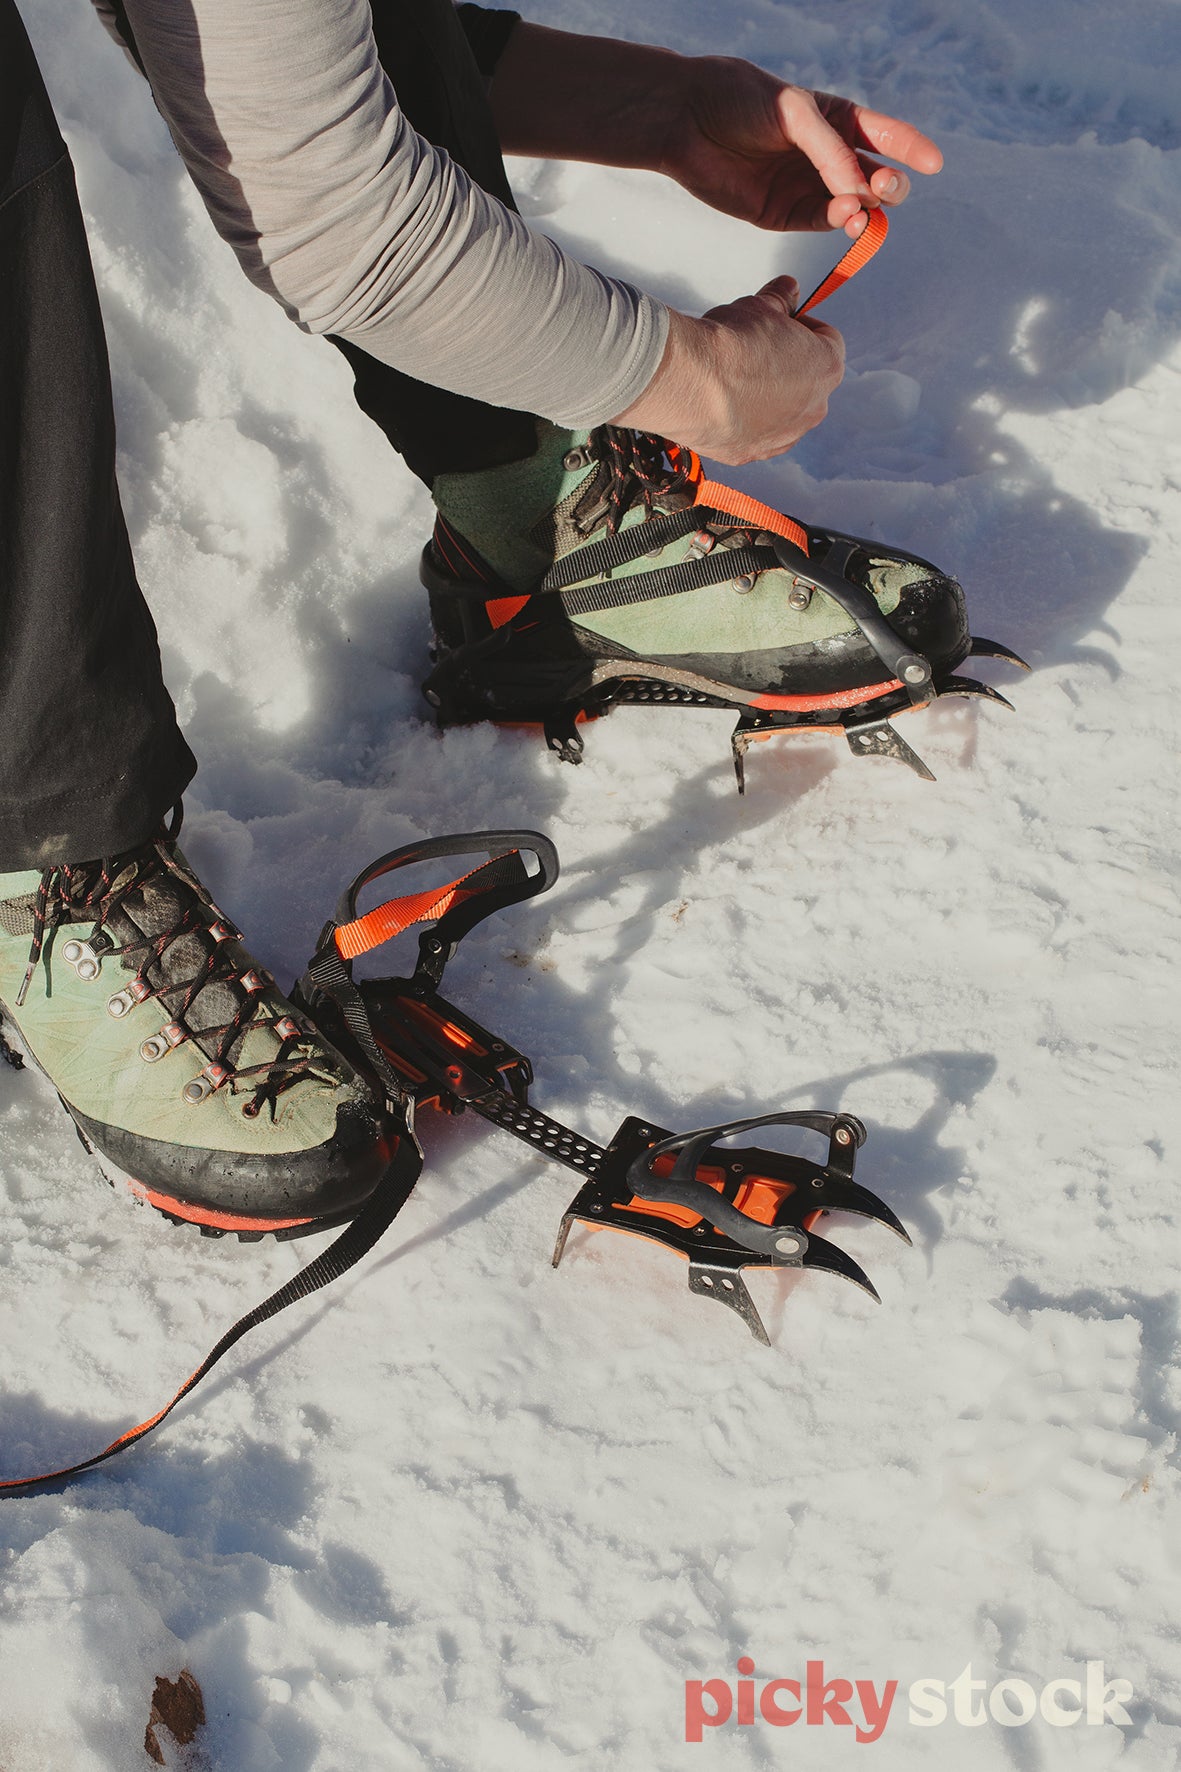 Hiker in grey top doing up snow spikes for mountain shoes. Bright orange laces, while standing in snow. Two hands do up orange laces.